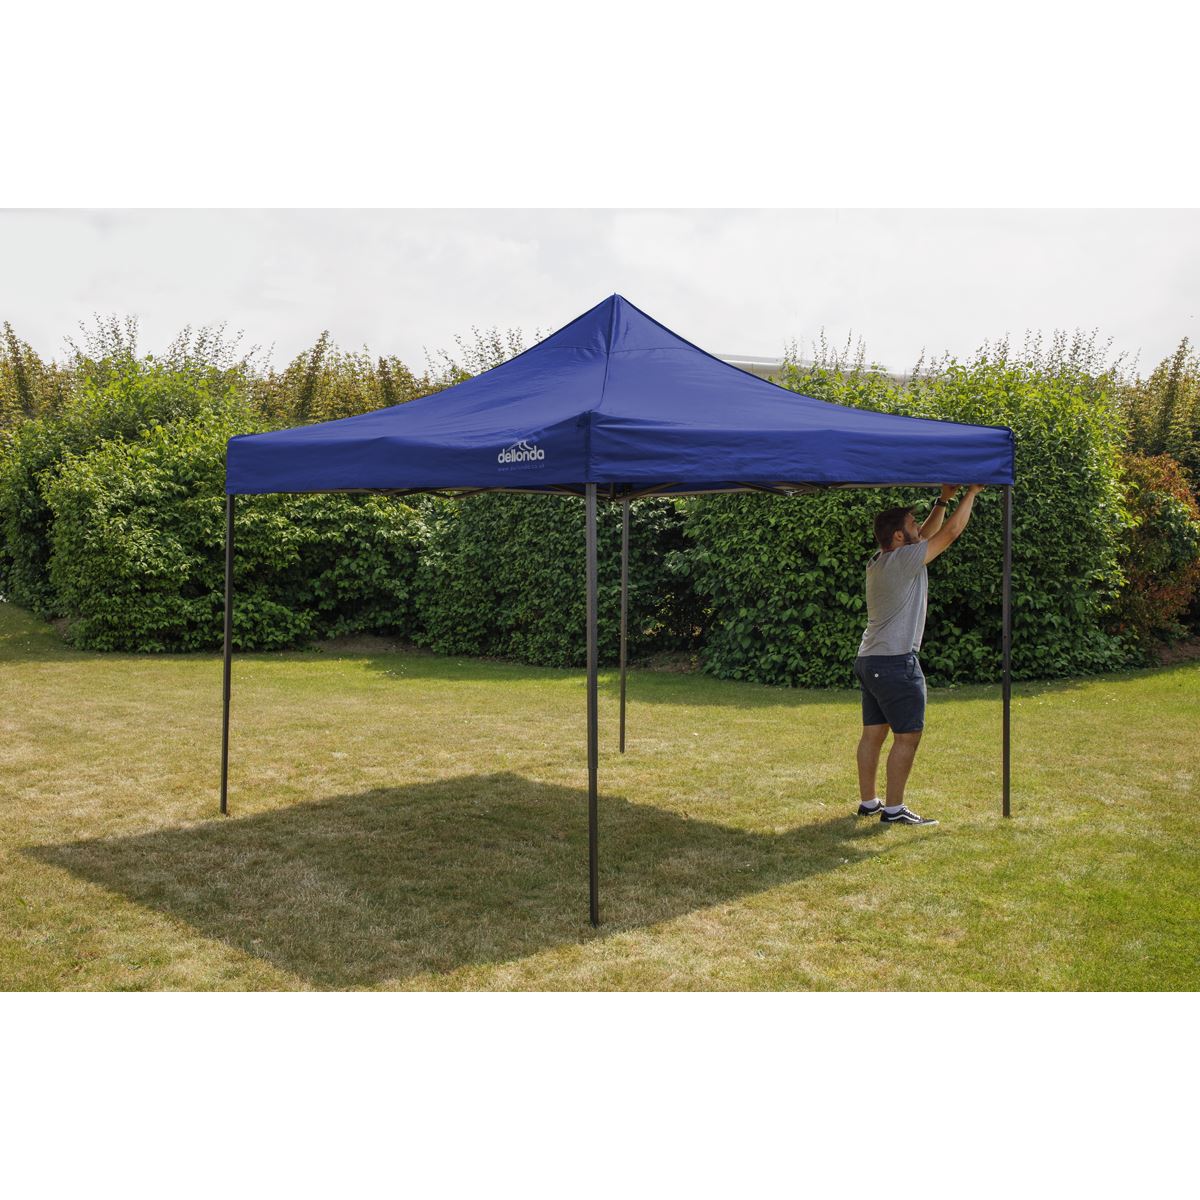 Dellonda Premium 3 x 3m Pop-Up Gazebo, PVC Coated, Water Resistant Fabric, Supplied with Carry Bag, Rope, Stakes & Weight Bags - Blue Canopy